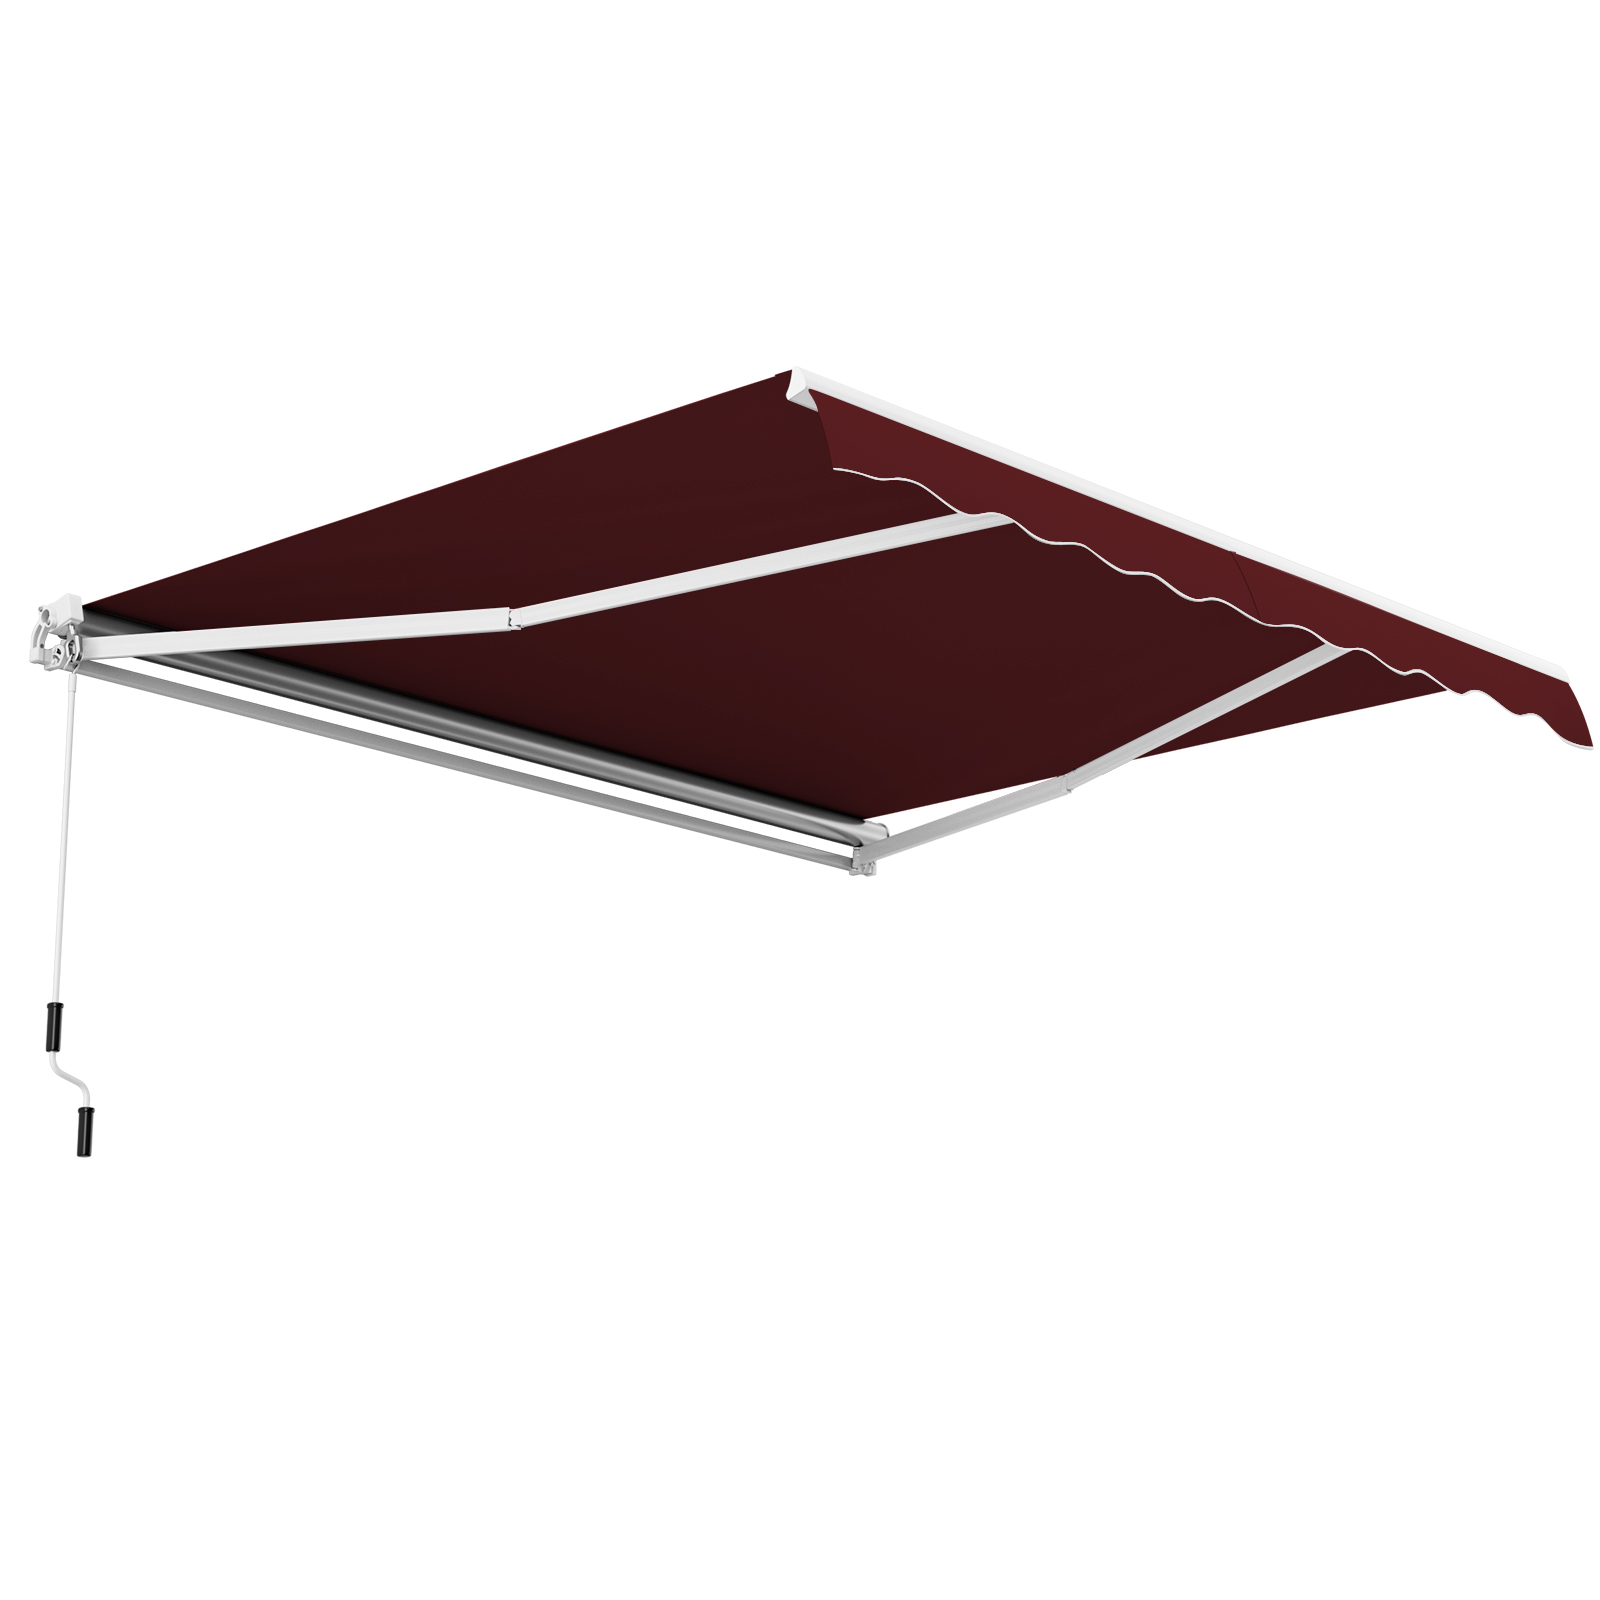 Patio_Retractable_Awning_with_Manual_Crank_Handle_Wine-4.jpg